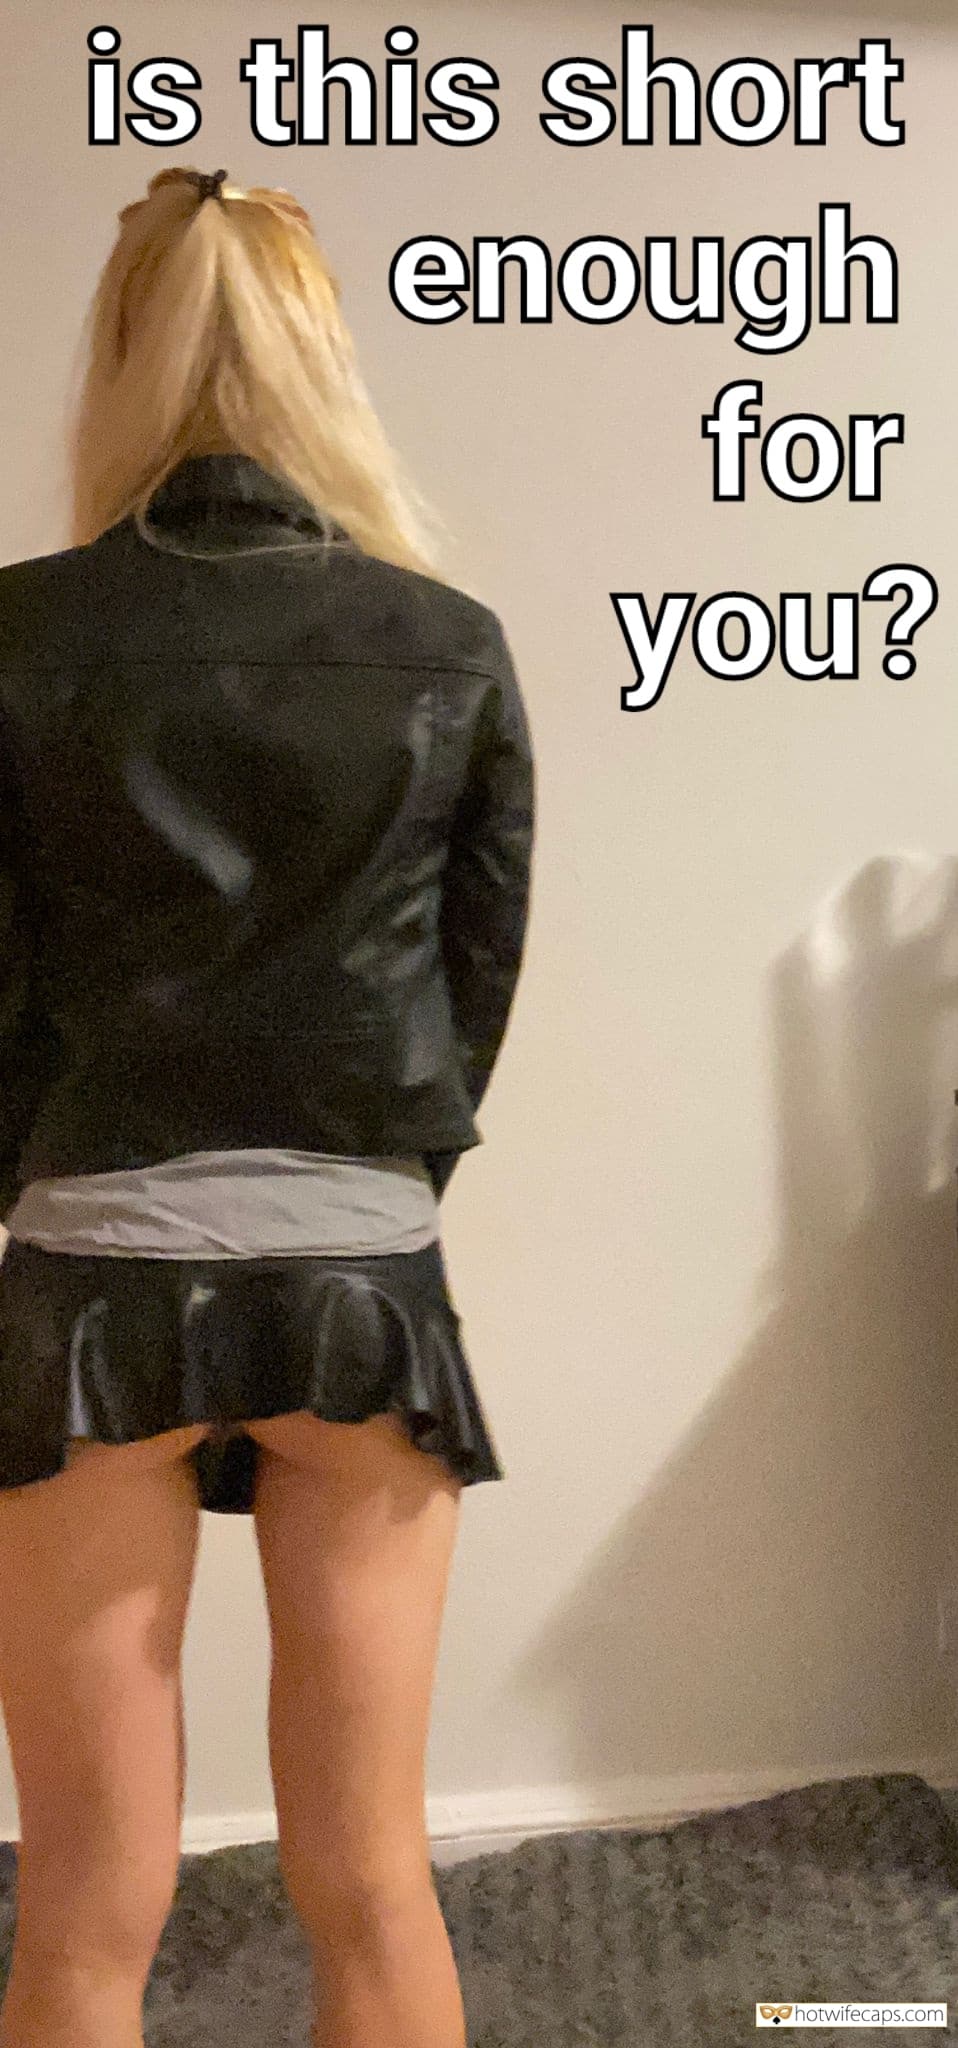 Booty Shorts Porn Captions - short skirt no panties captions, memes and dirty quotes on HotwifeCaps